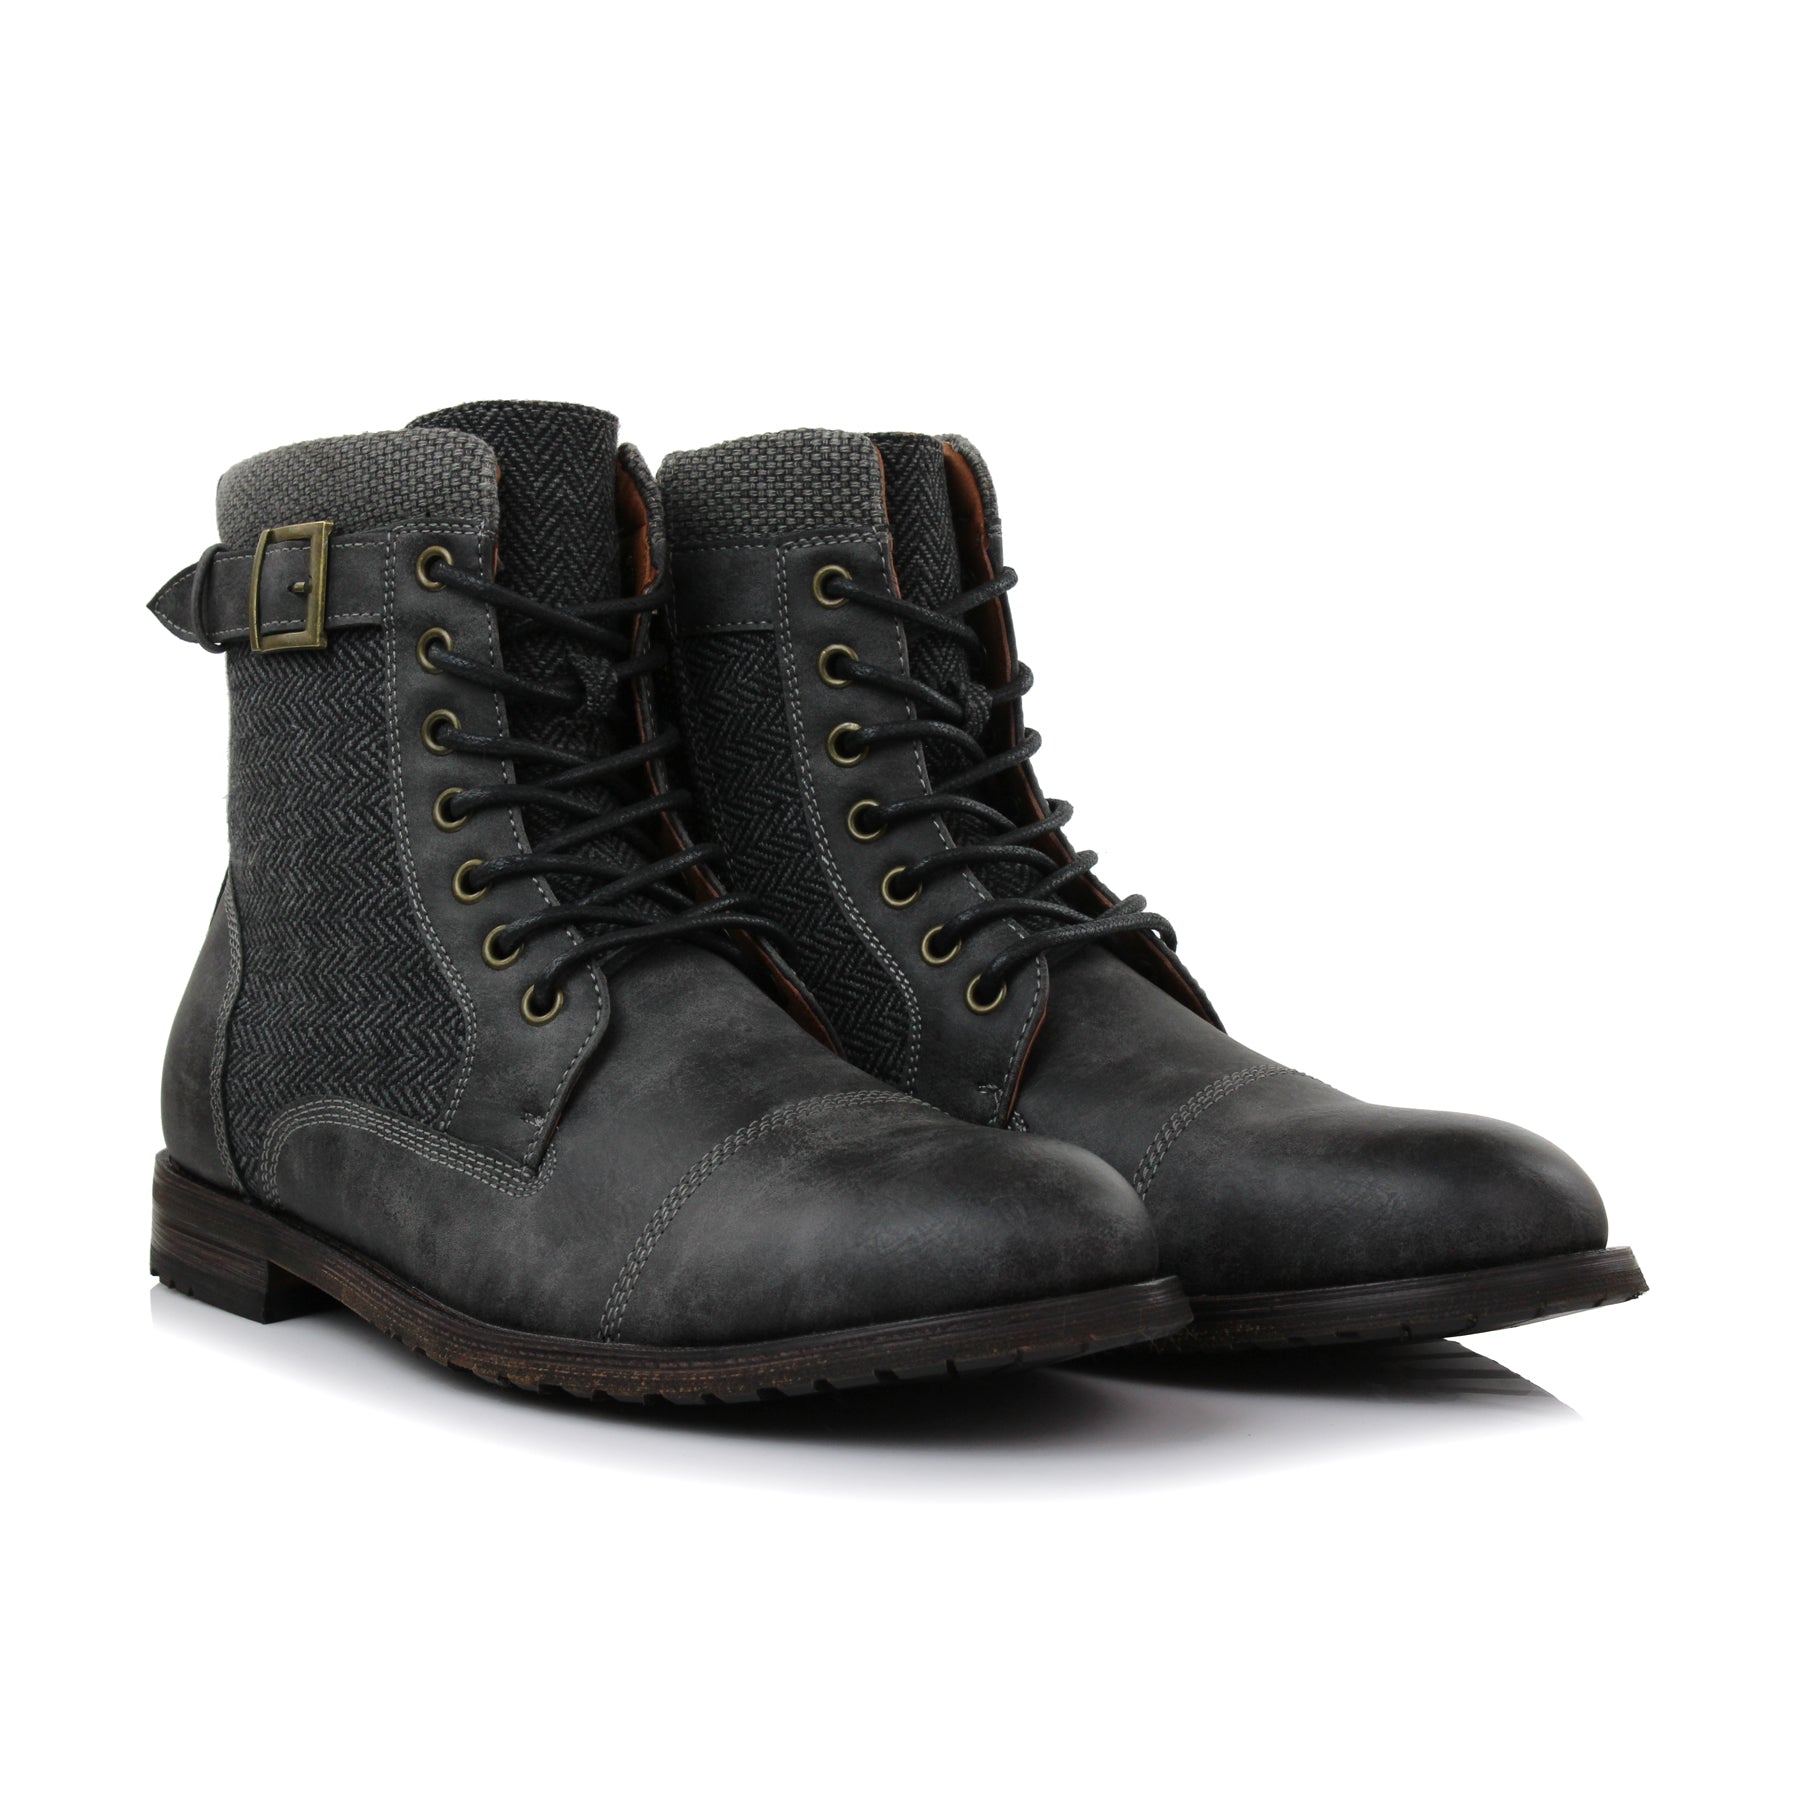 Rugged Duo-Textured Boots | Elijah by Polar Fox | Conal Footwear | Paired Angle View